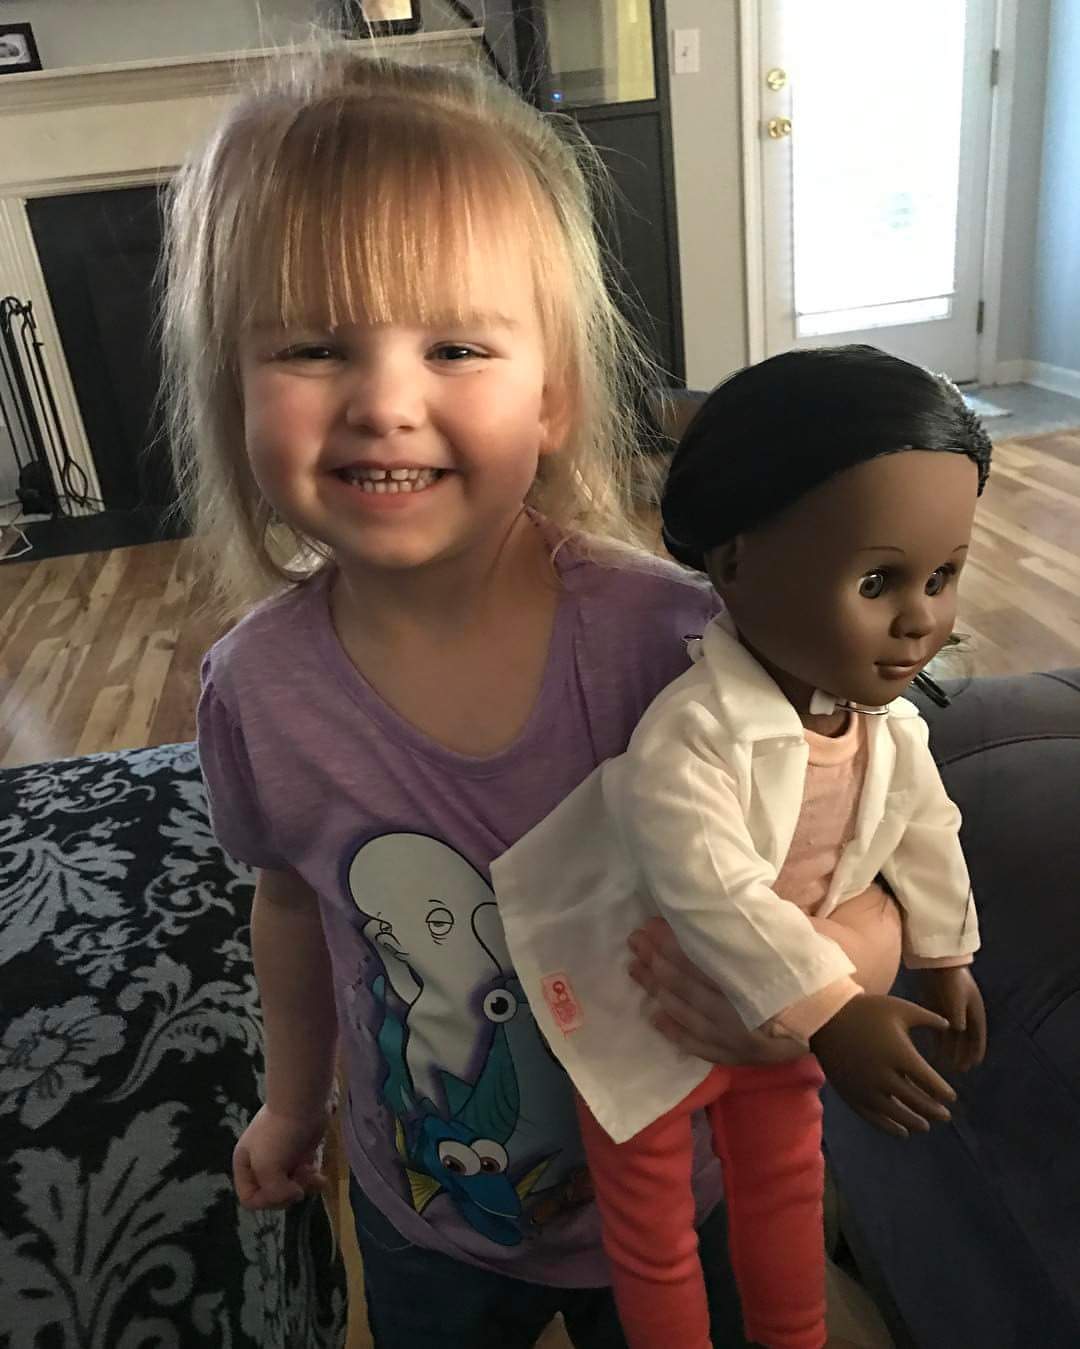 How 2-Year-Old Girl Sophia Benner Defended Her Choice Of A Doll With Different Skin Color